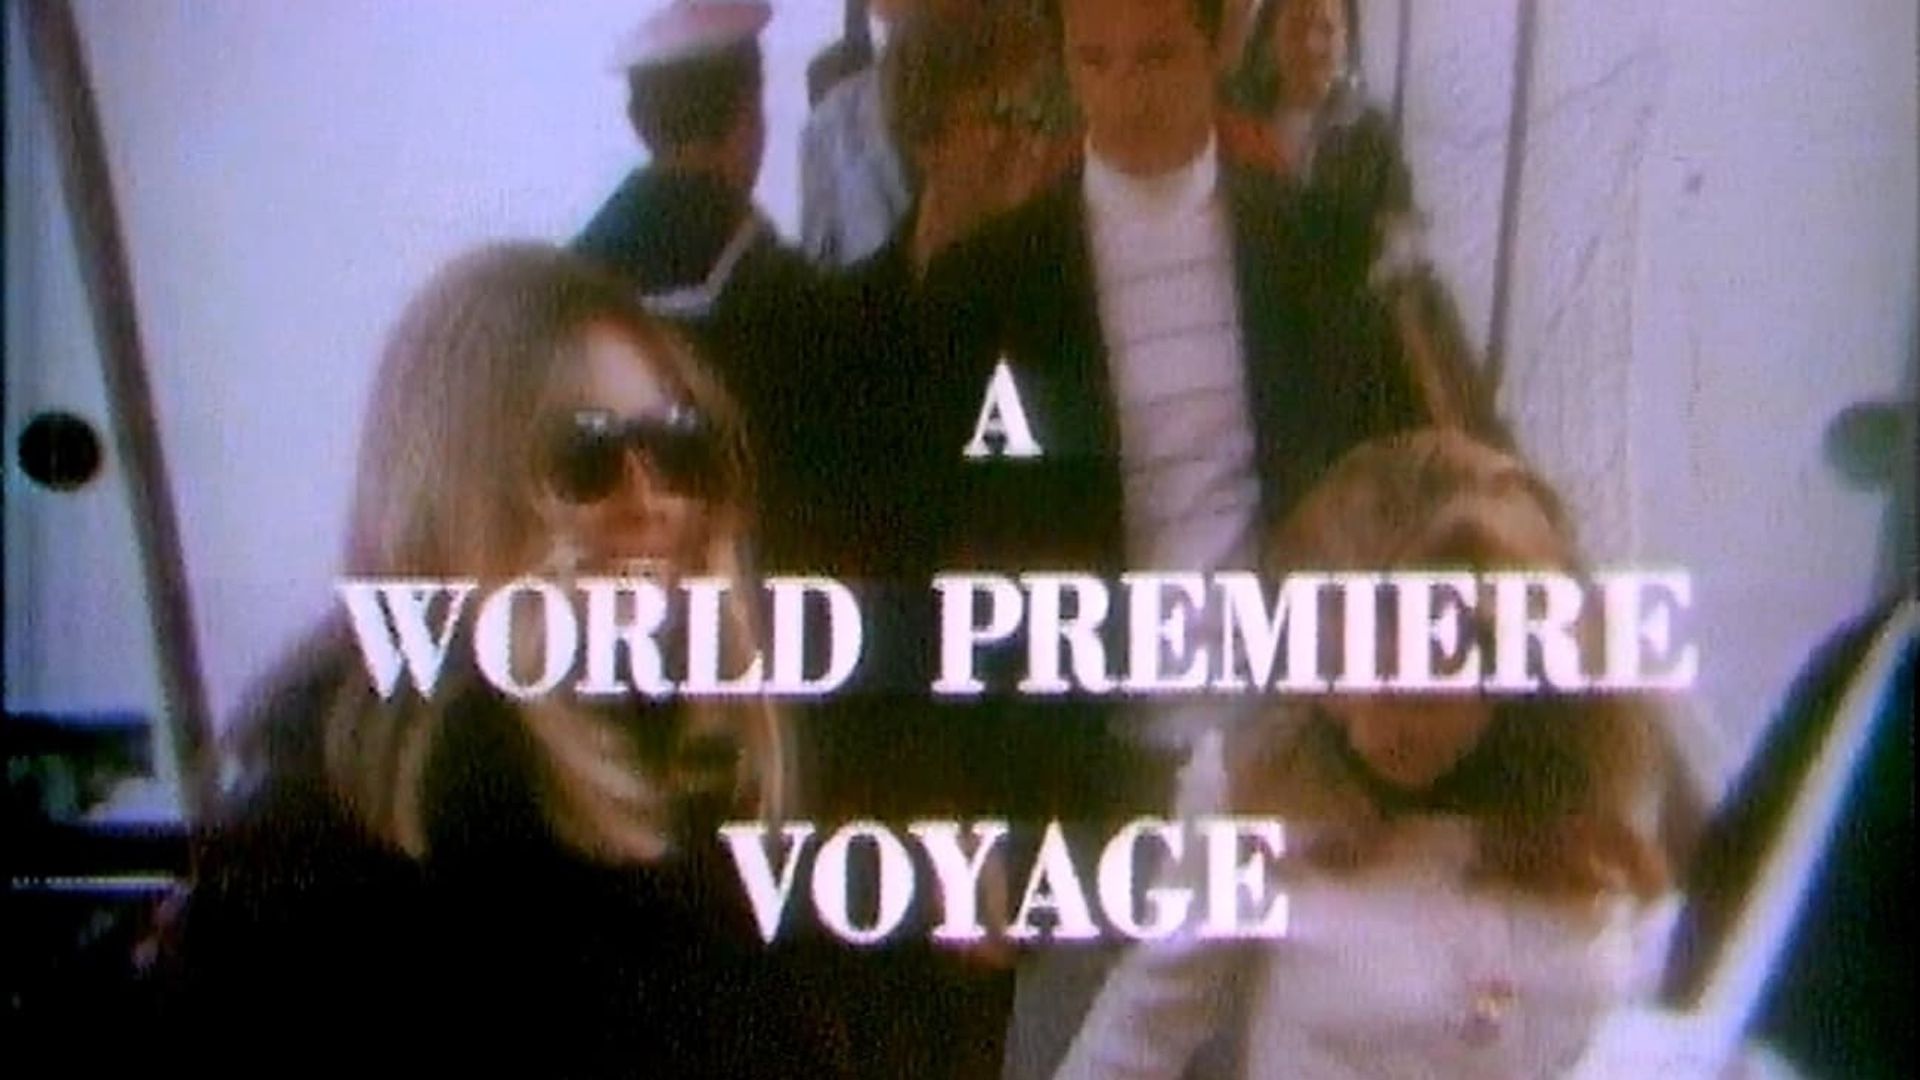 Valley of the Dolls: A World Premiere Voyage background